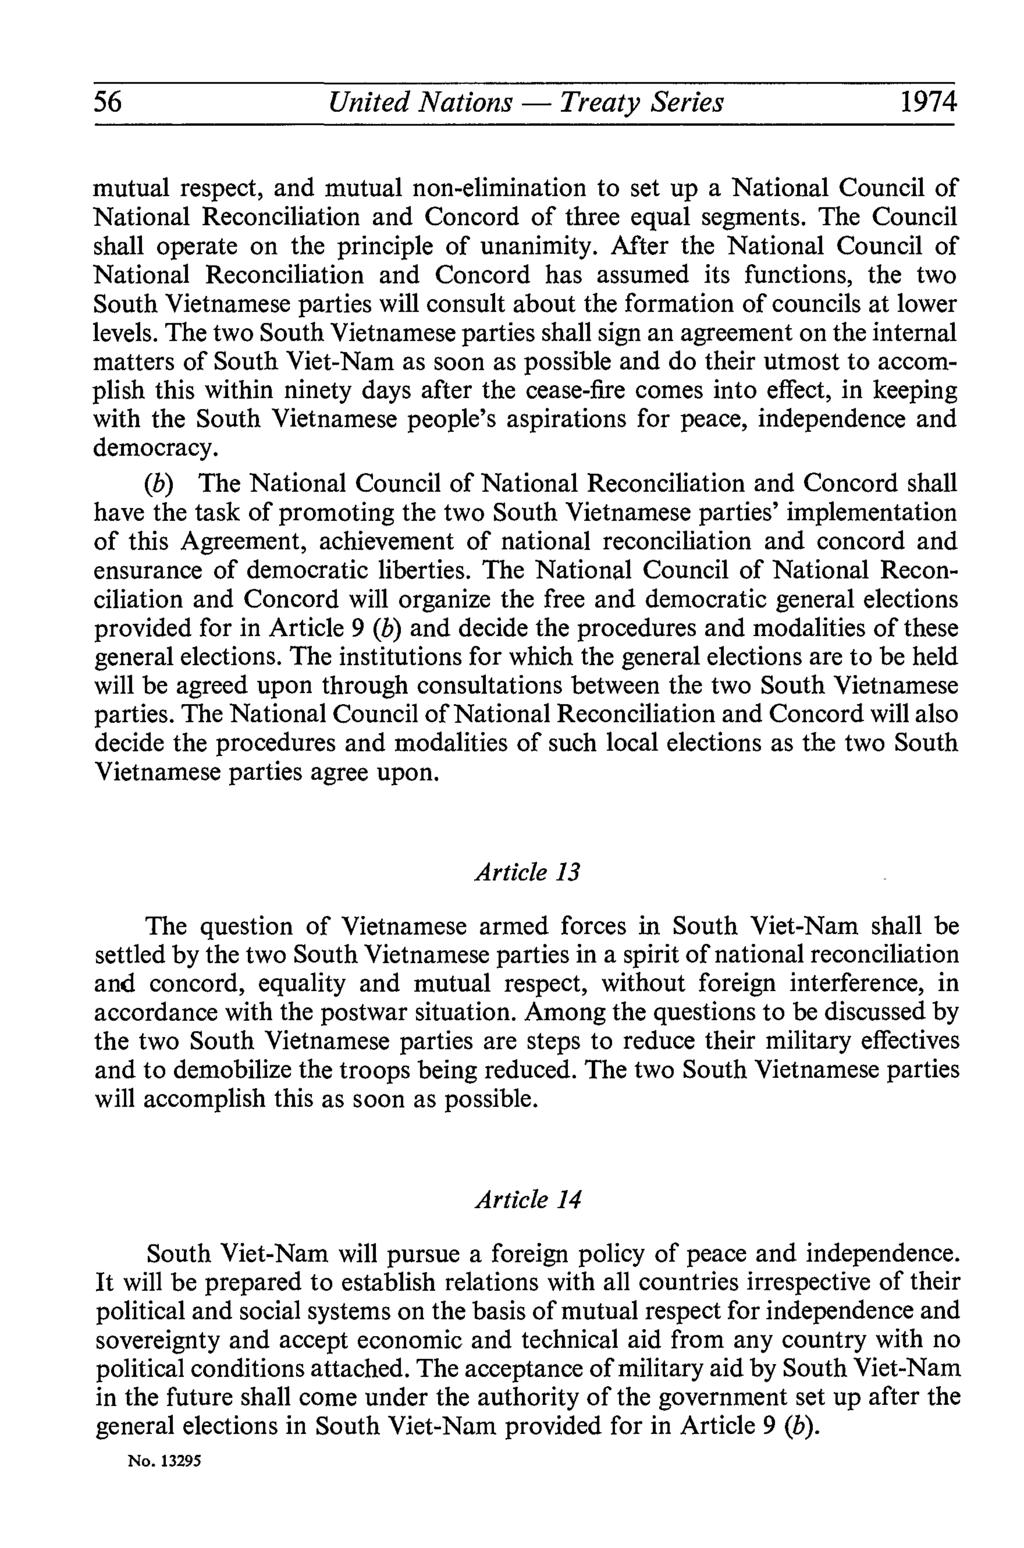 56 United Nations Treaty Series 1974 mutual respect, and mutual non-elimination to set up a National Council of National Reconciliation and Concord of three equal segments.